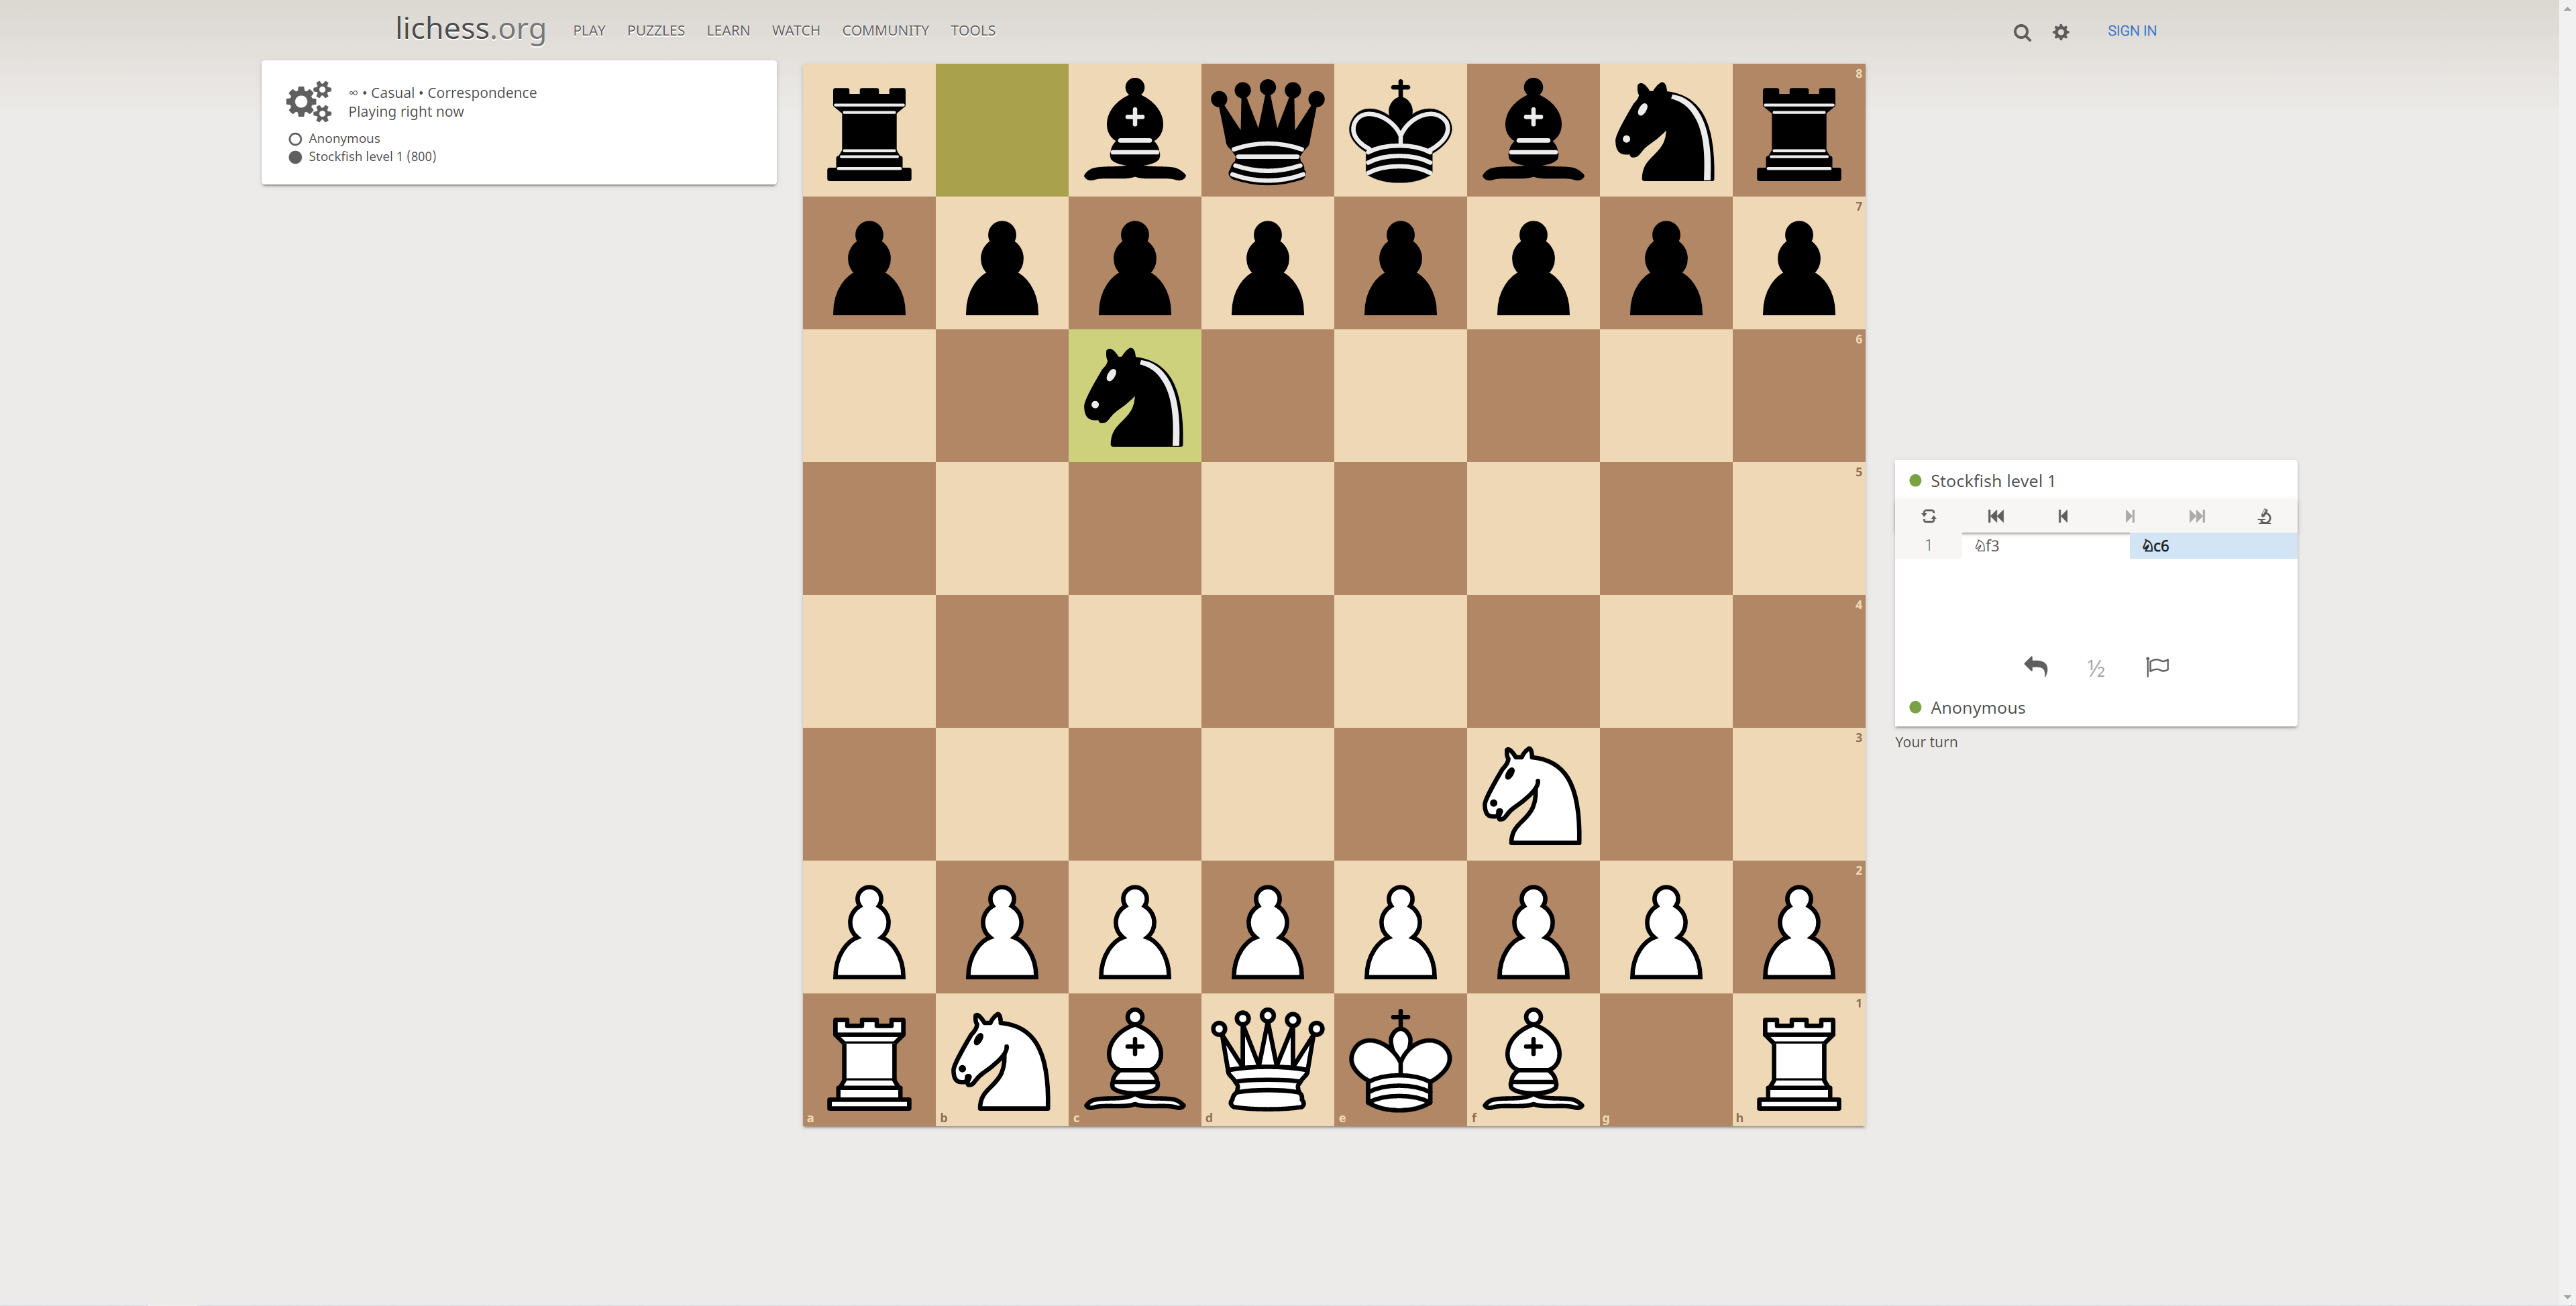 Move list cut off in analysis mode • page 1/1 • Lichess Feedback • lichess .org